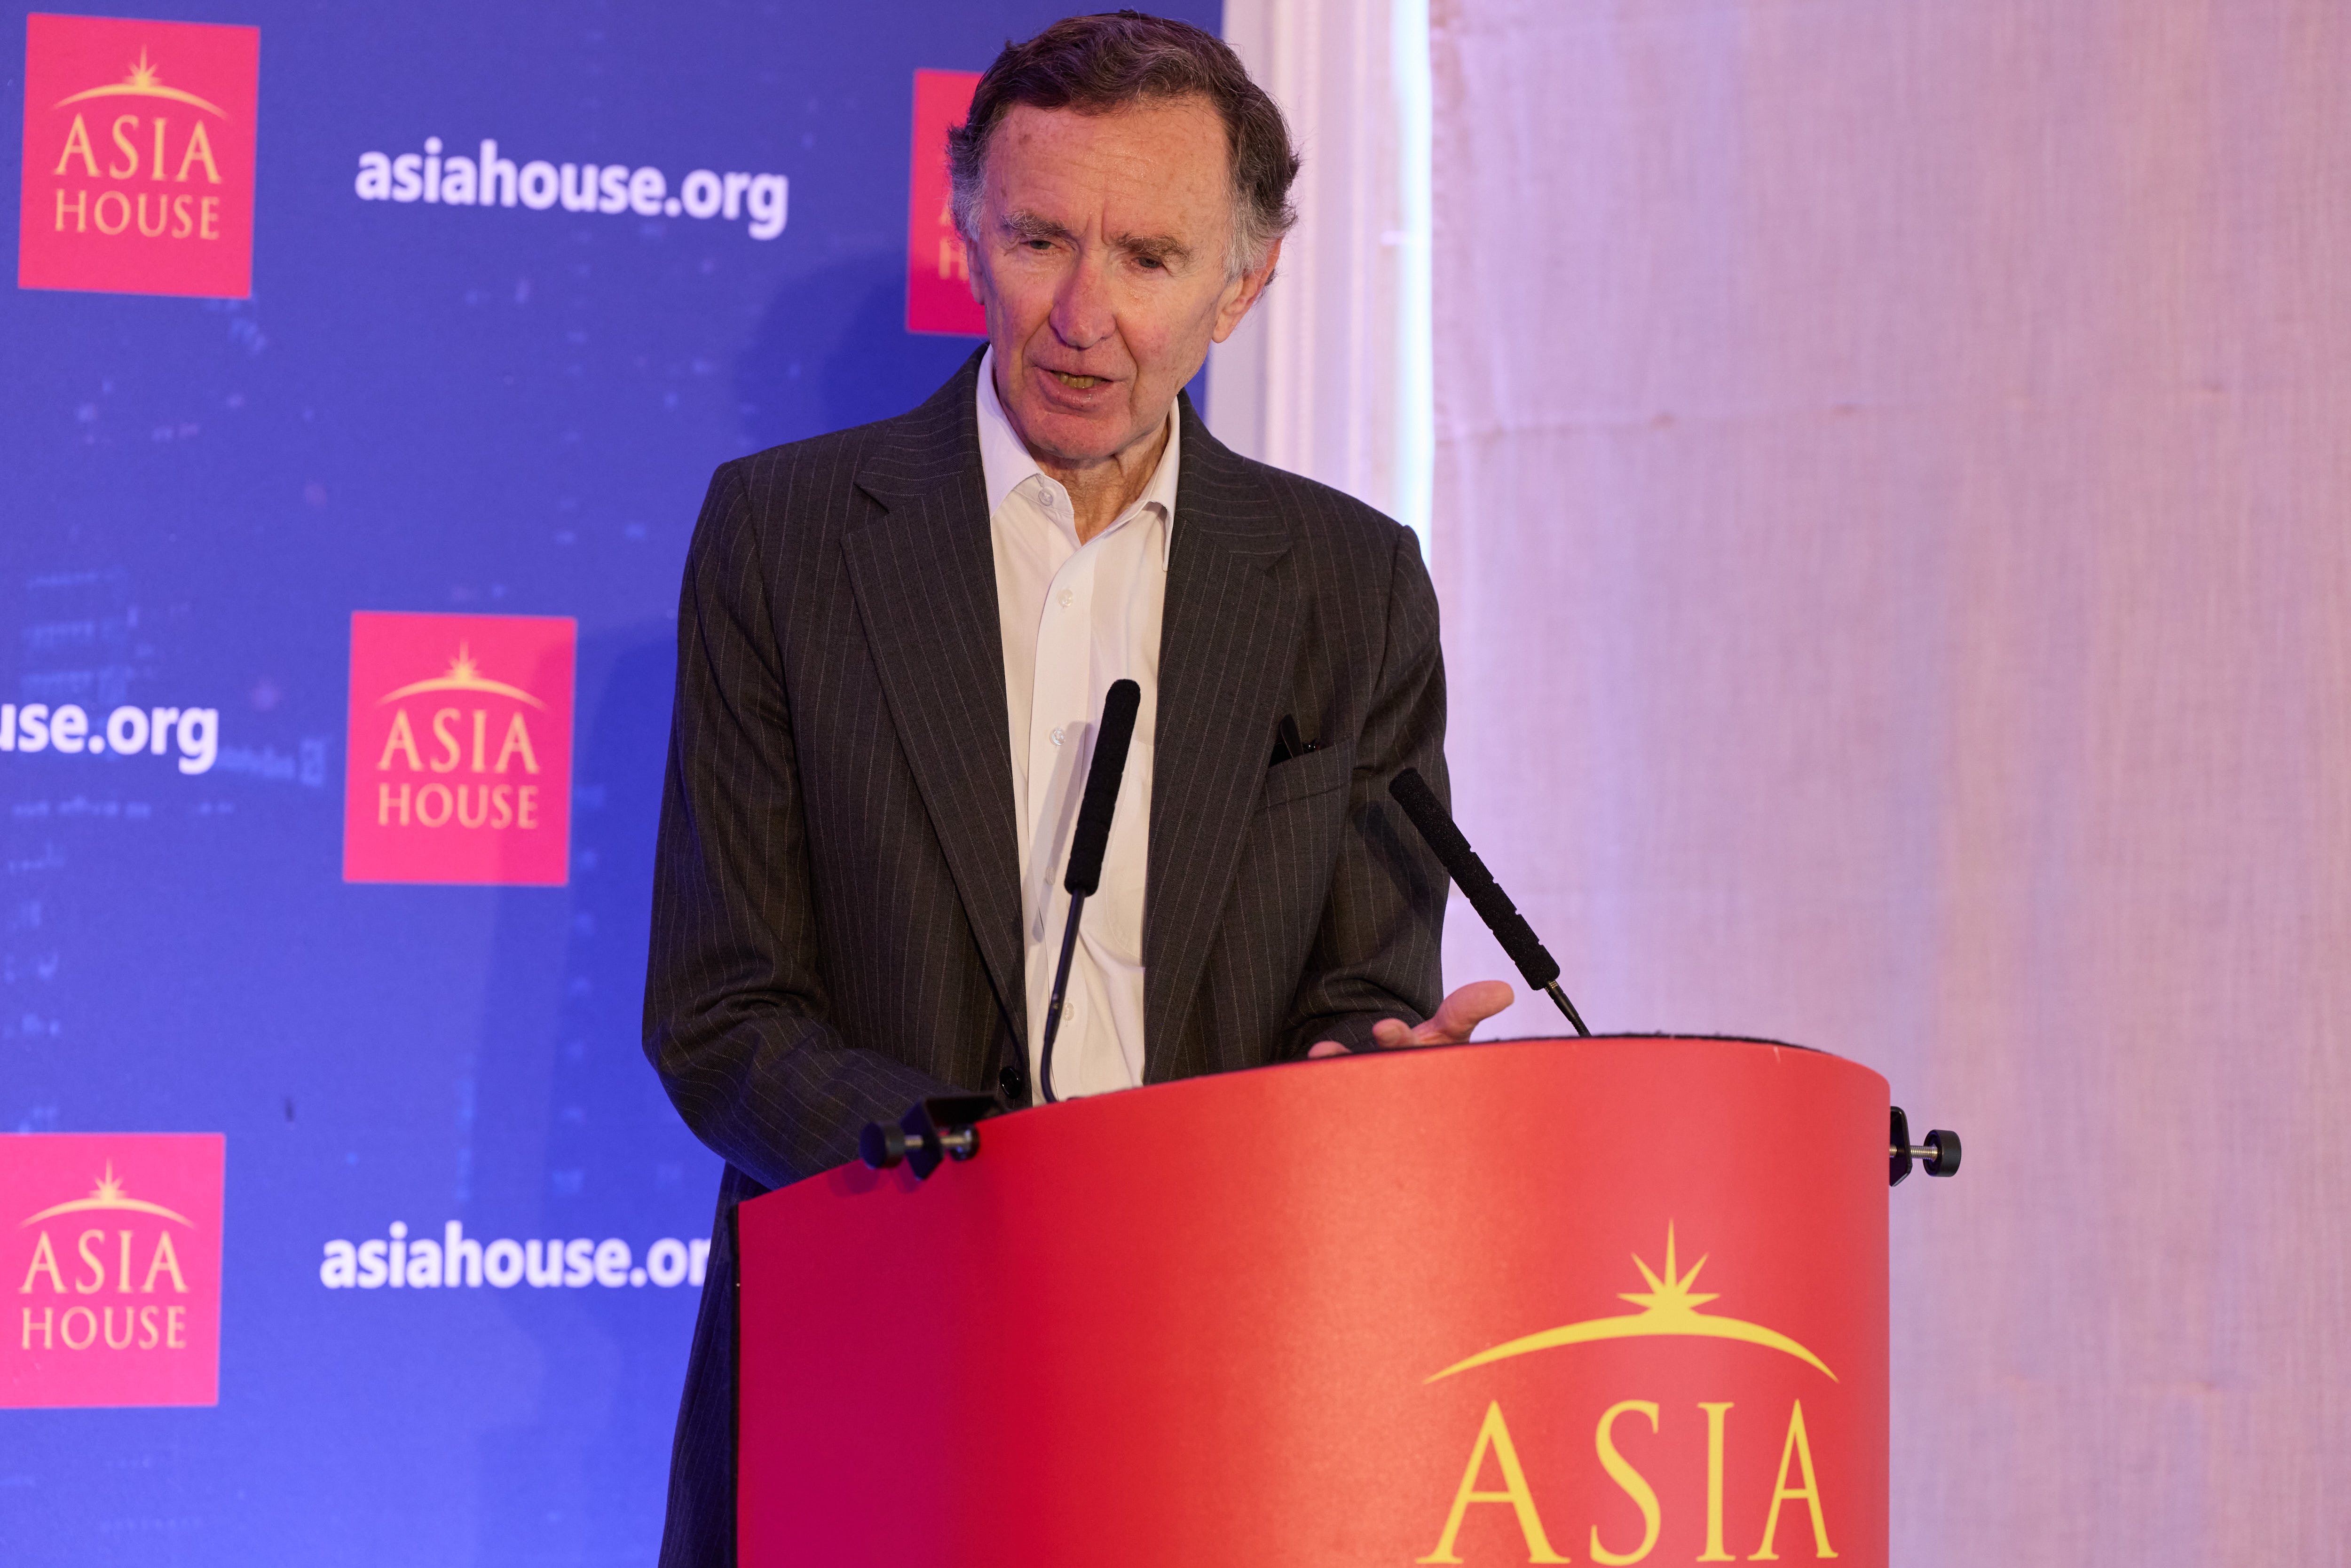 Lord Green of Hurstpierpoint, Chairman at Asia House